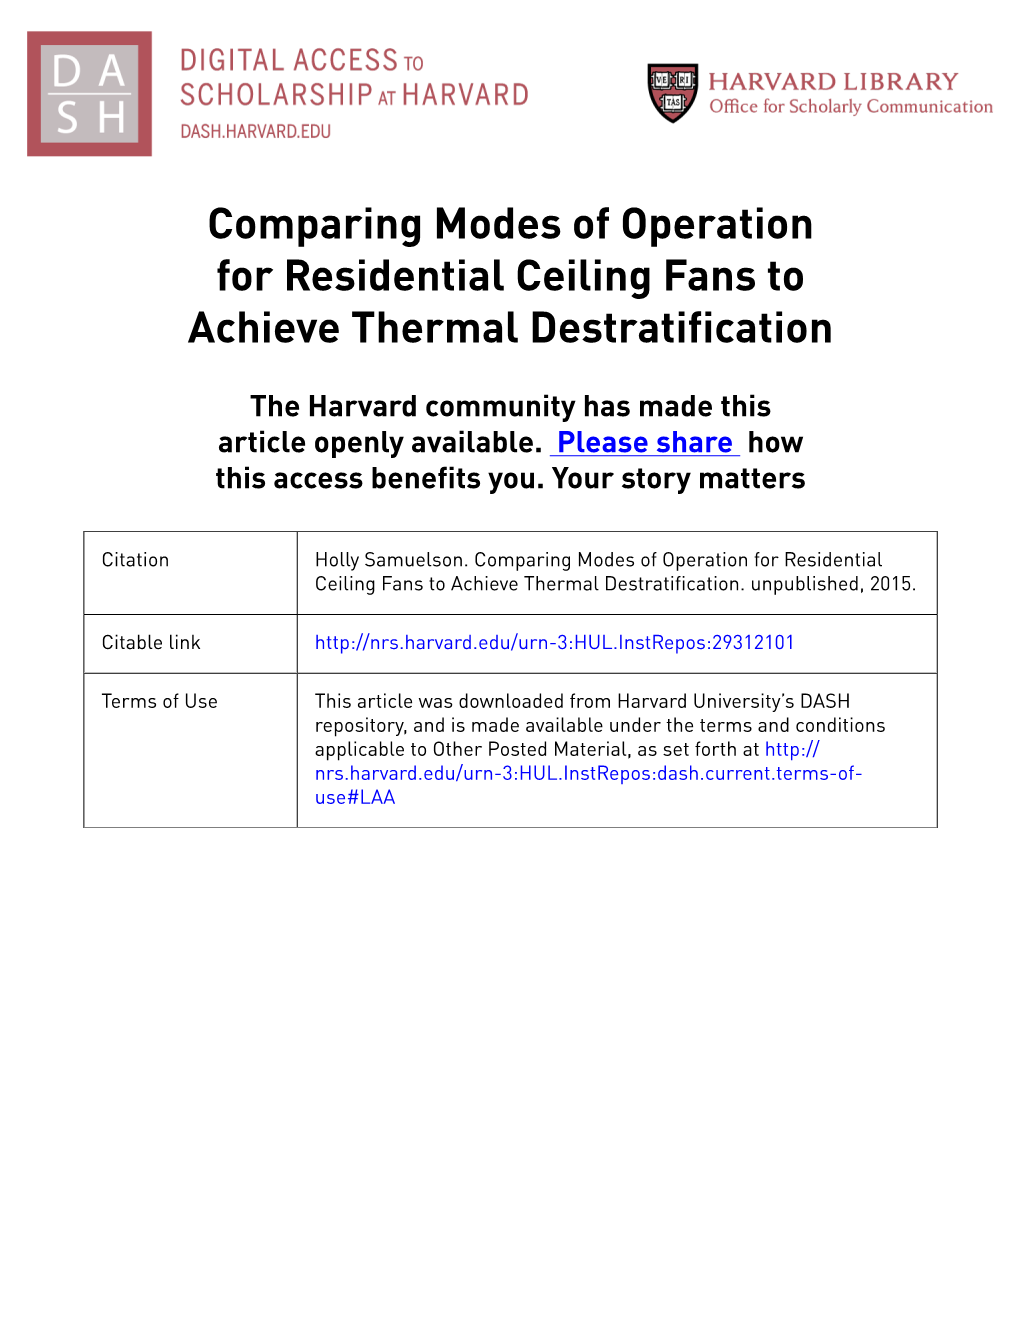 Comparing Modes of Operation for Residential Ceiling Fans to Achieve Thermal Destratification